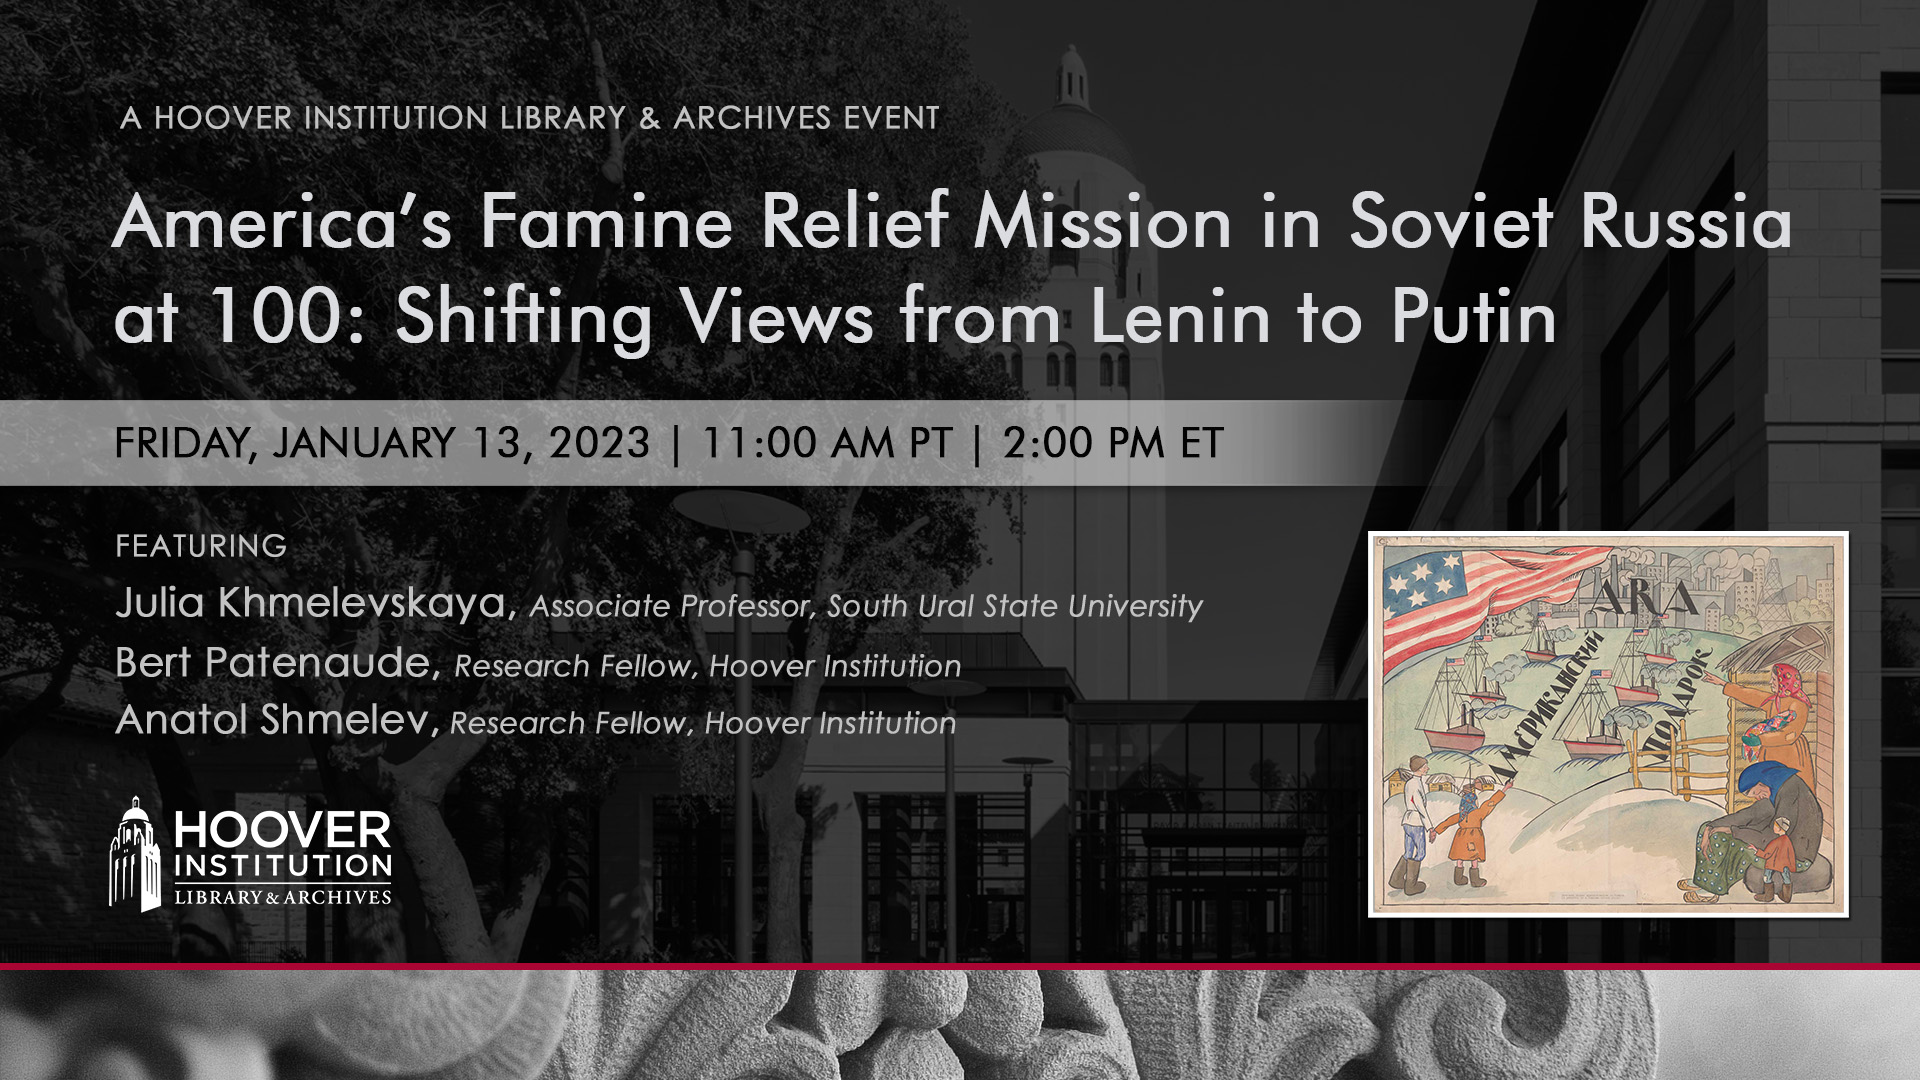 America’s Famine Relief Mission in Soviet Russia at 100: Shifting Views from Lenin to Putin